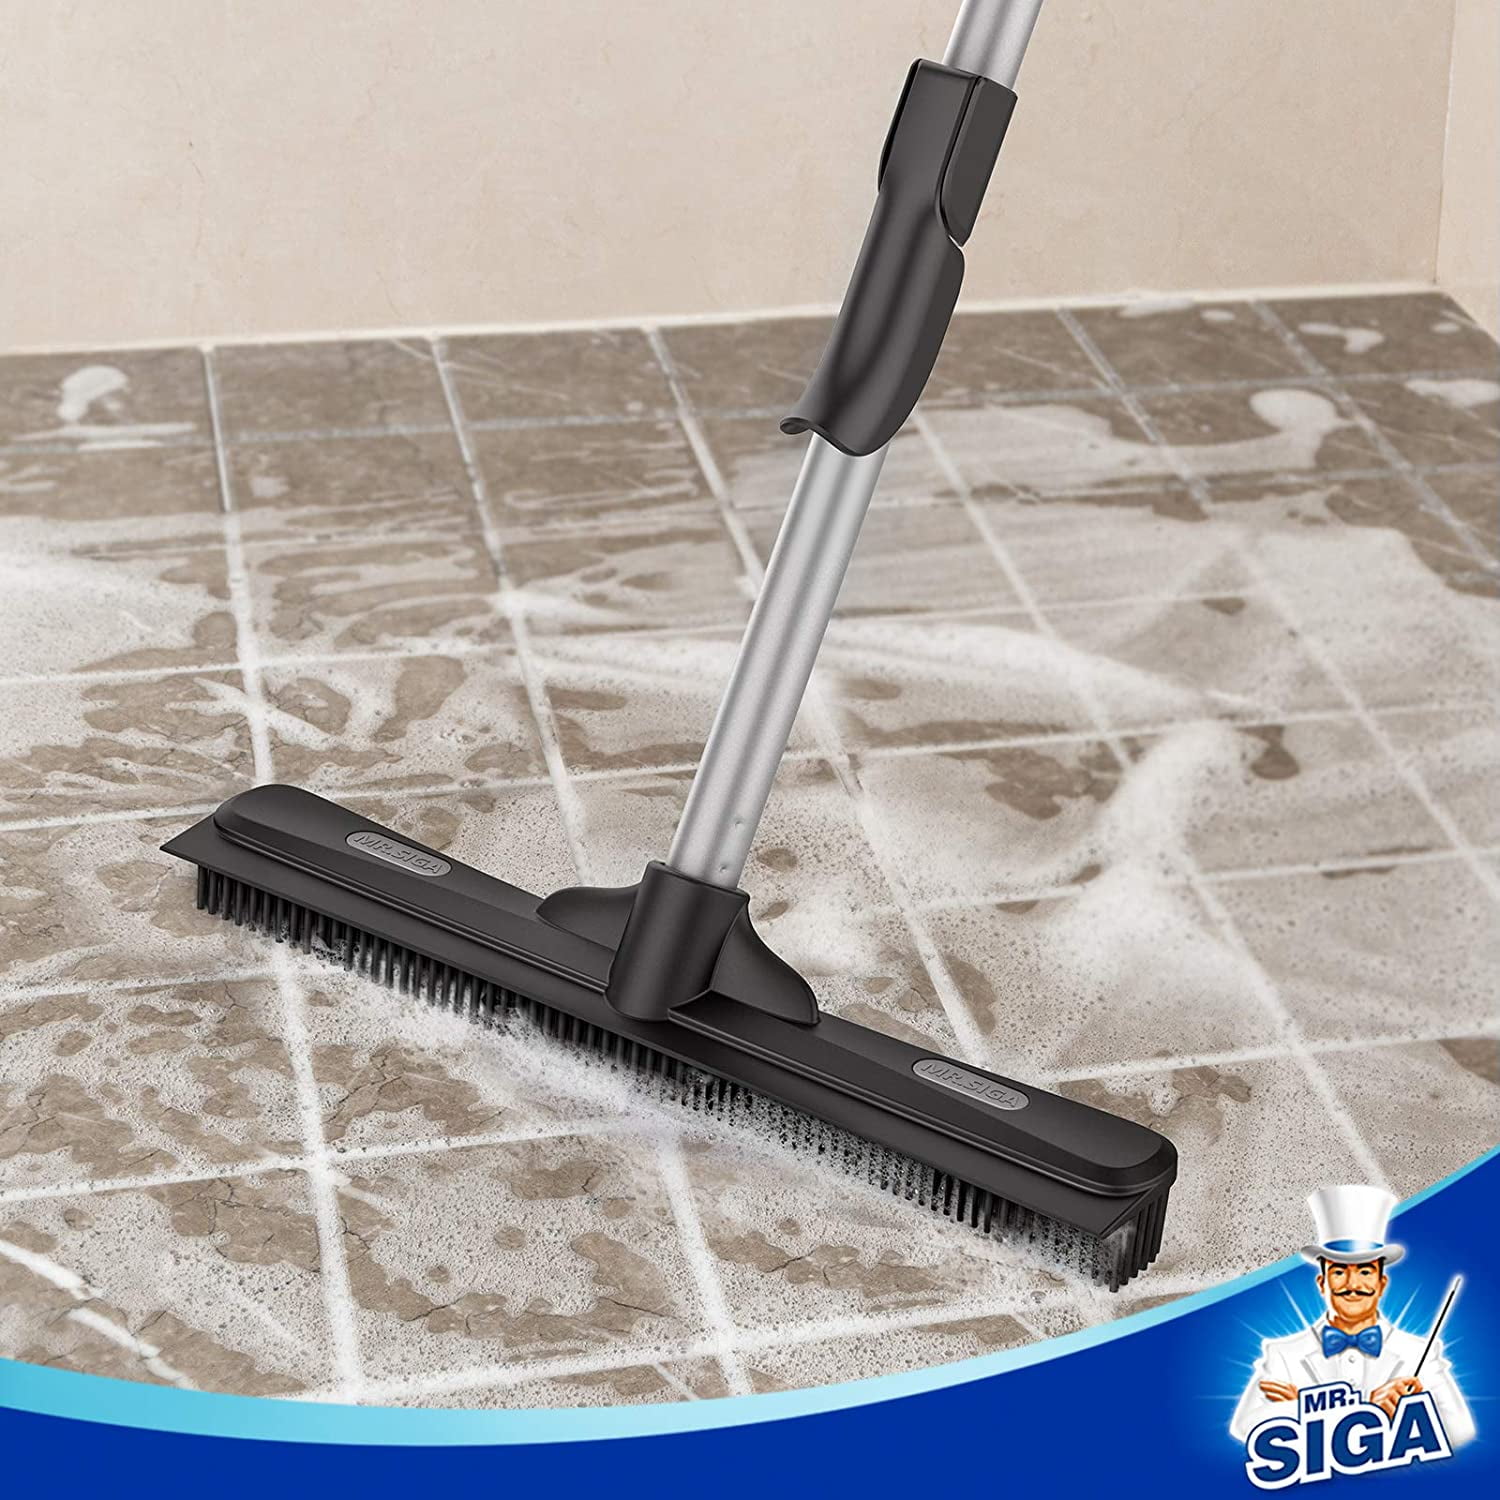 61 inch Adjustable Handle 2 in 1 Floor Brush for Carpet Includes One Microfiber Cloth for Floor Dusting MR.SIGA Per Hair Removal Rubber Broom with Built in Squeegee 